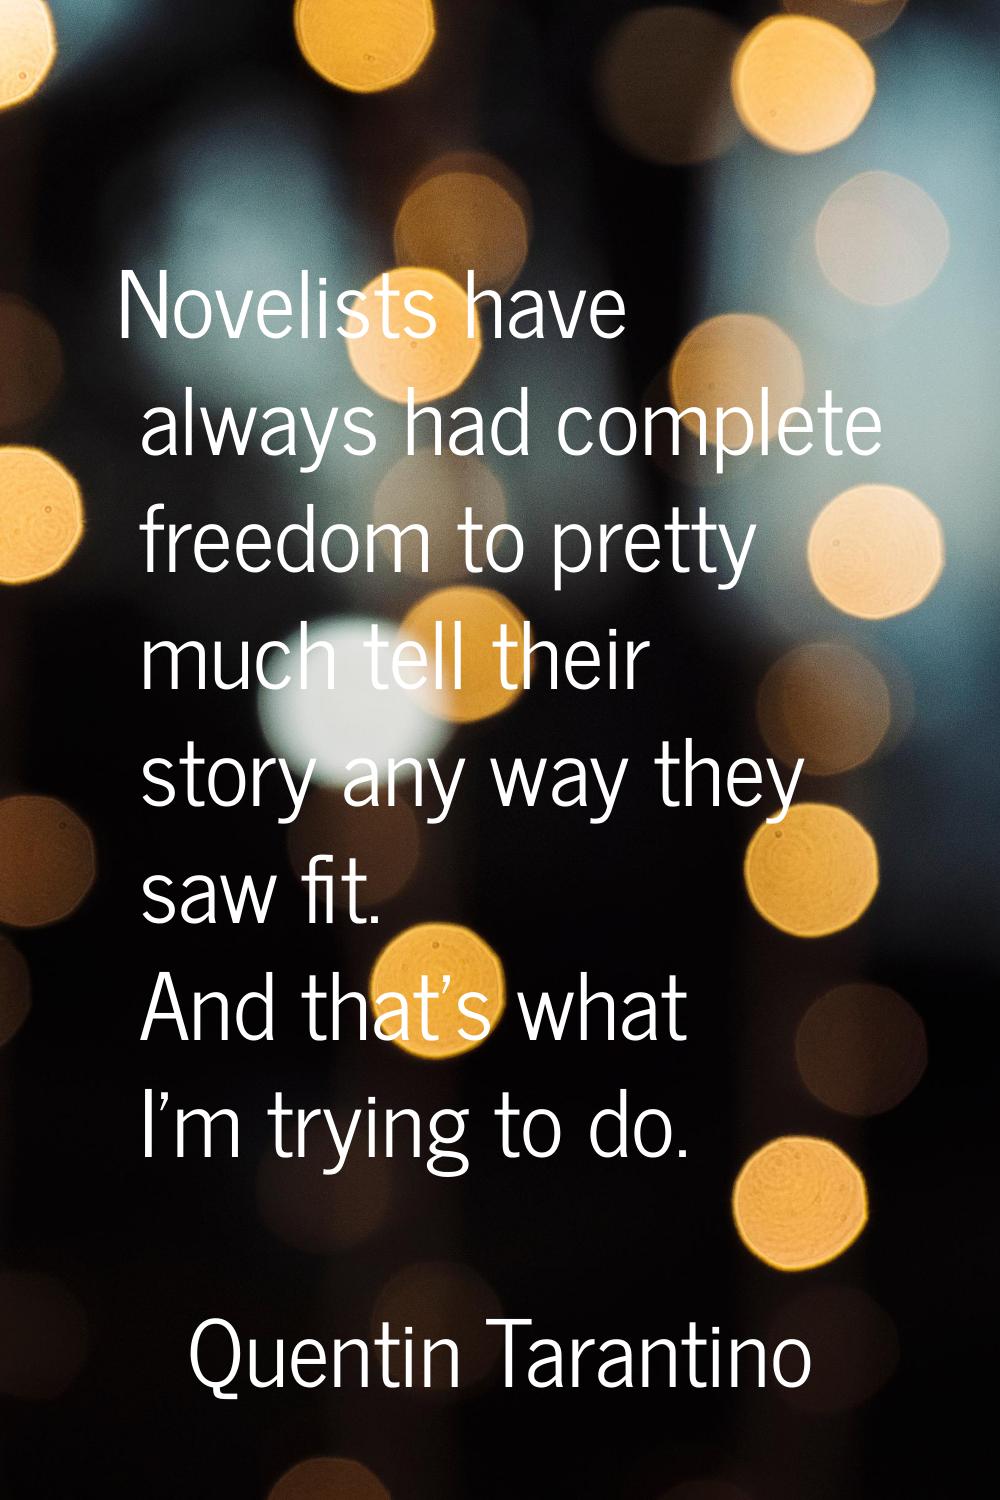 Novelists have always had complete freedom to pretty much tell their story any way they saw fit. An